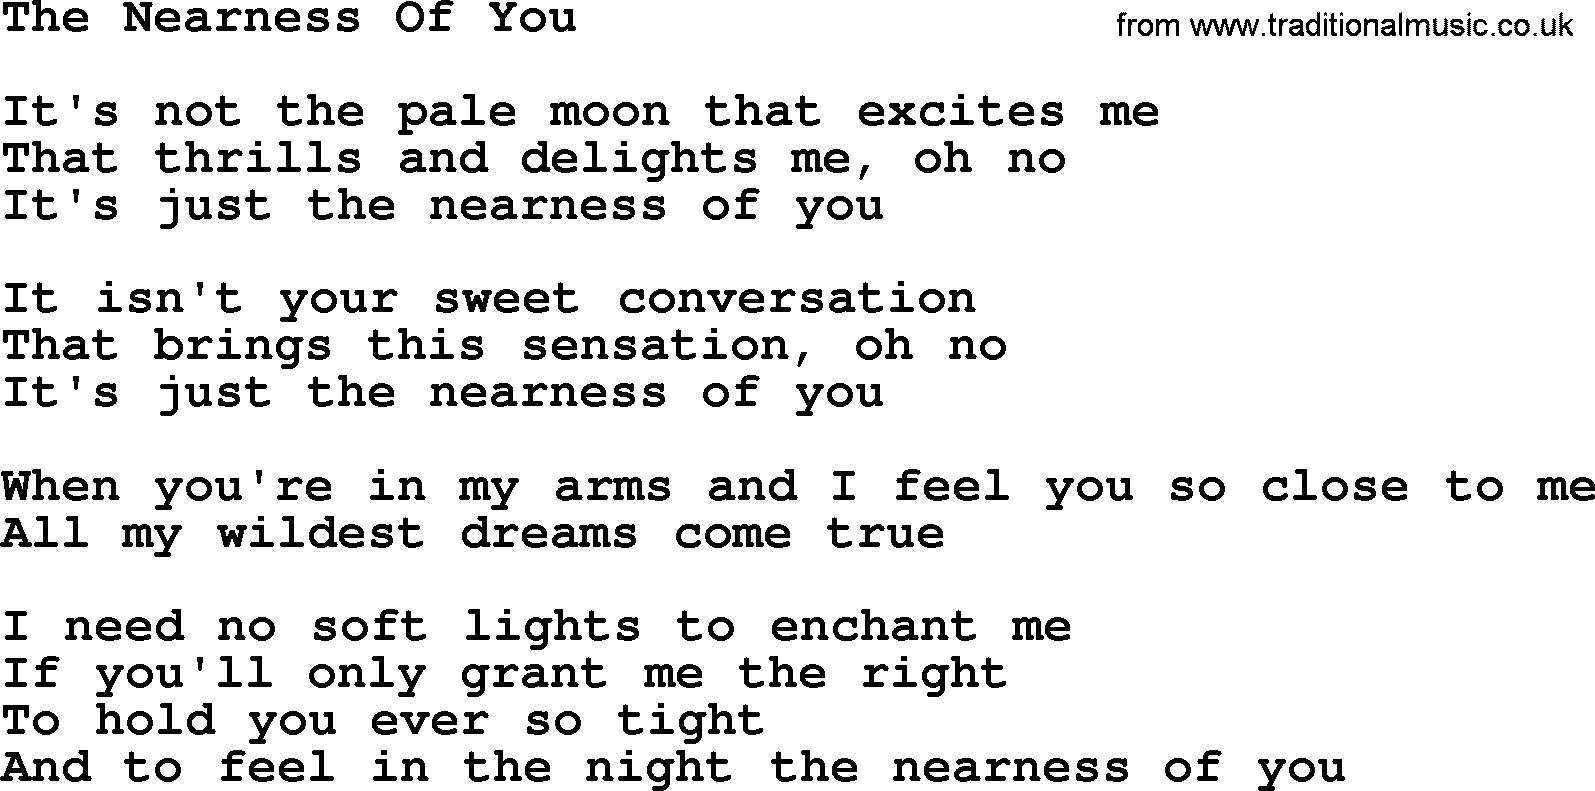 Willie Nelson song: The Nearness Of You lyrics